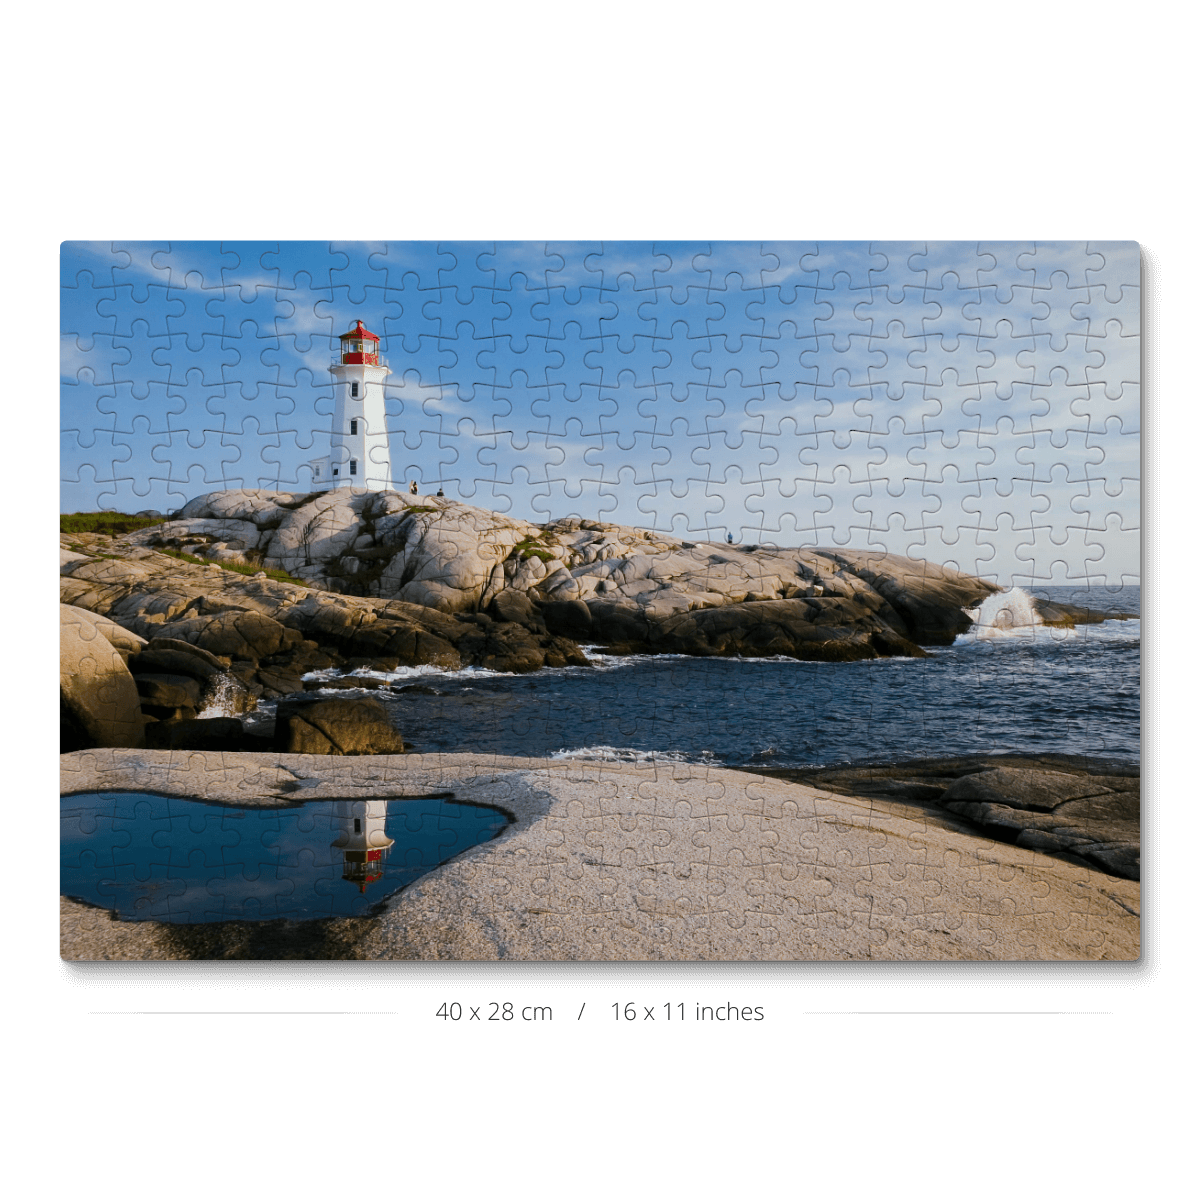 A 300-piece jigsaw puzzle featuring Peggy's Cove lighthouse, a picturesque coastal landmark.